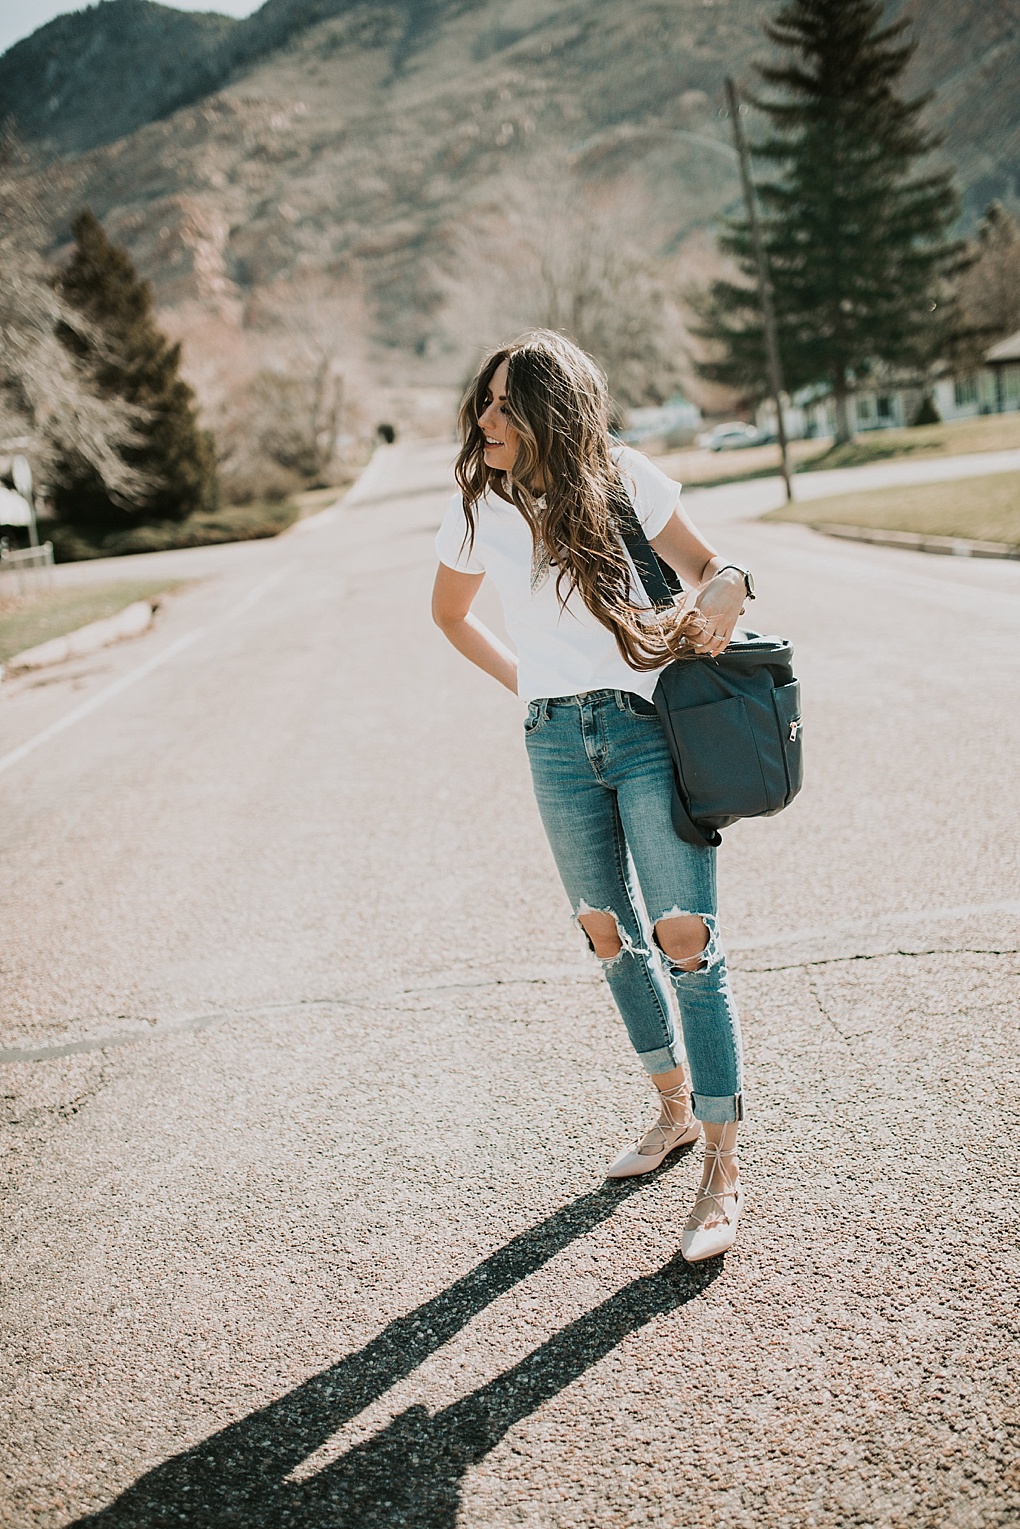 girl standing in road in white embroidered tee shirt with neck scarf and high waisted distressed denim jeans and fawn design diaper bag with long brown hair with caramel highlights loosely curled